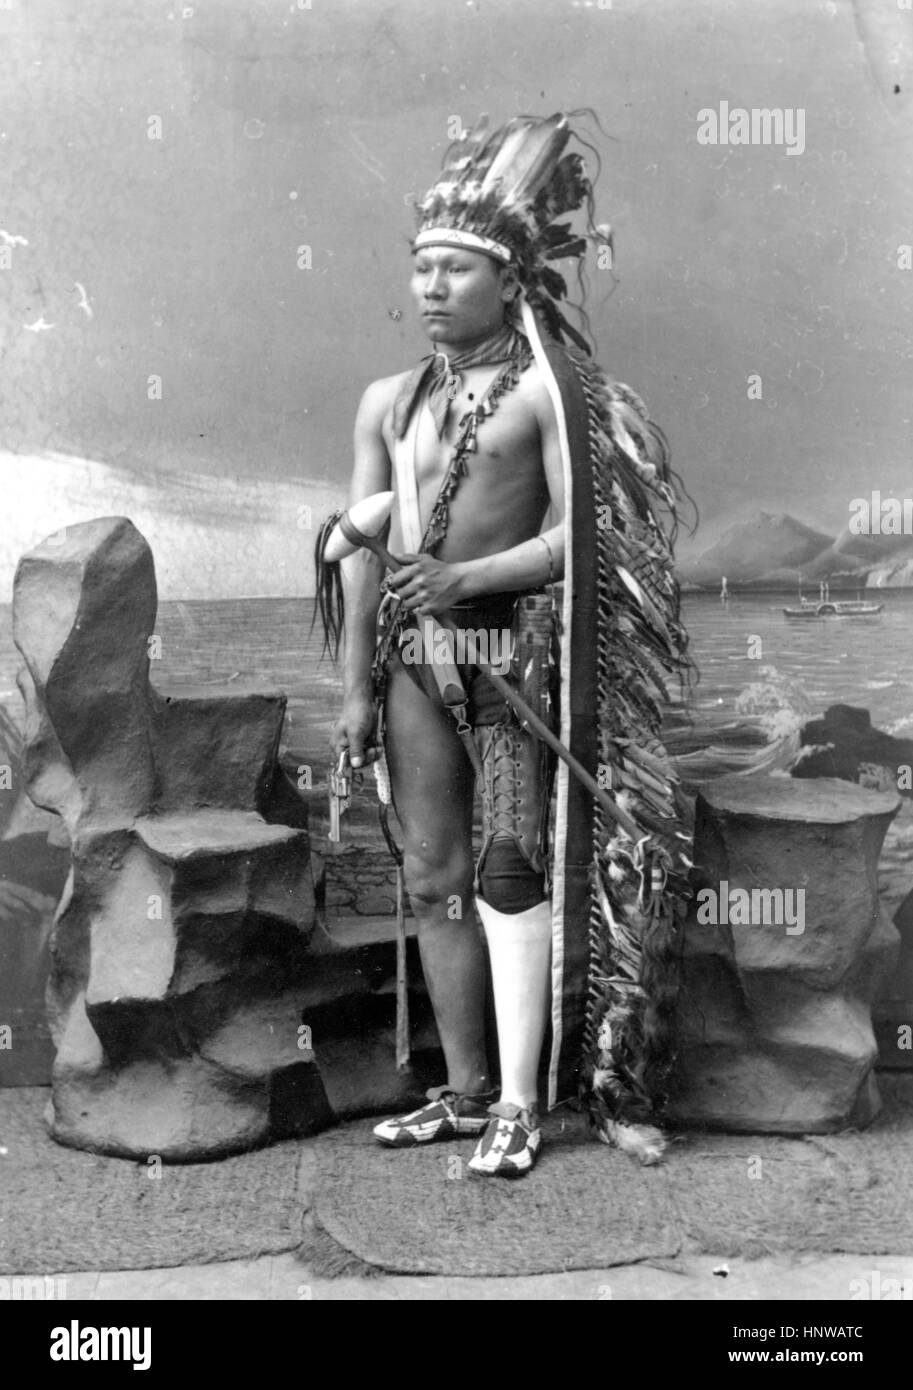 American Indian, Native American young man, wearing a Prosthetic leg.  Photo probably was taken in South Dakota. 1880s   Possible photographer - R.L. Kelly   To see my other weapon-related vintage images, Search:  Prestor  vintage  weapon  west Stock Photo